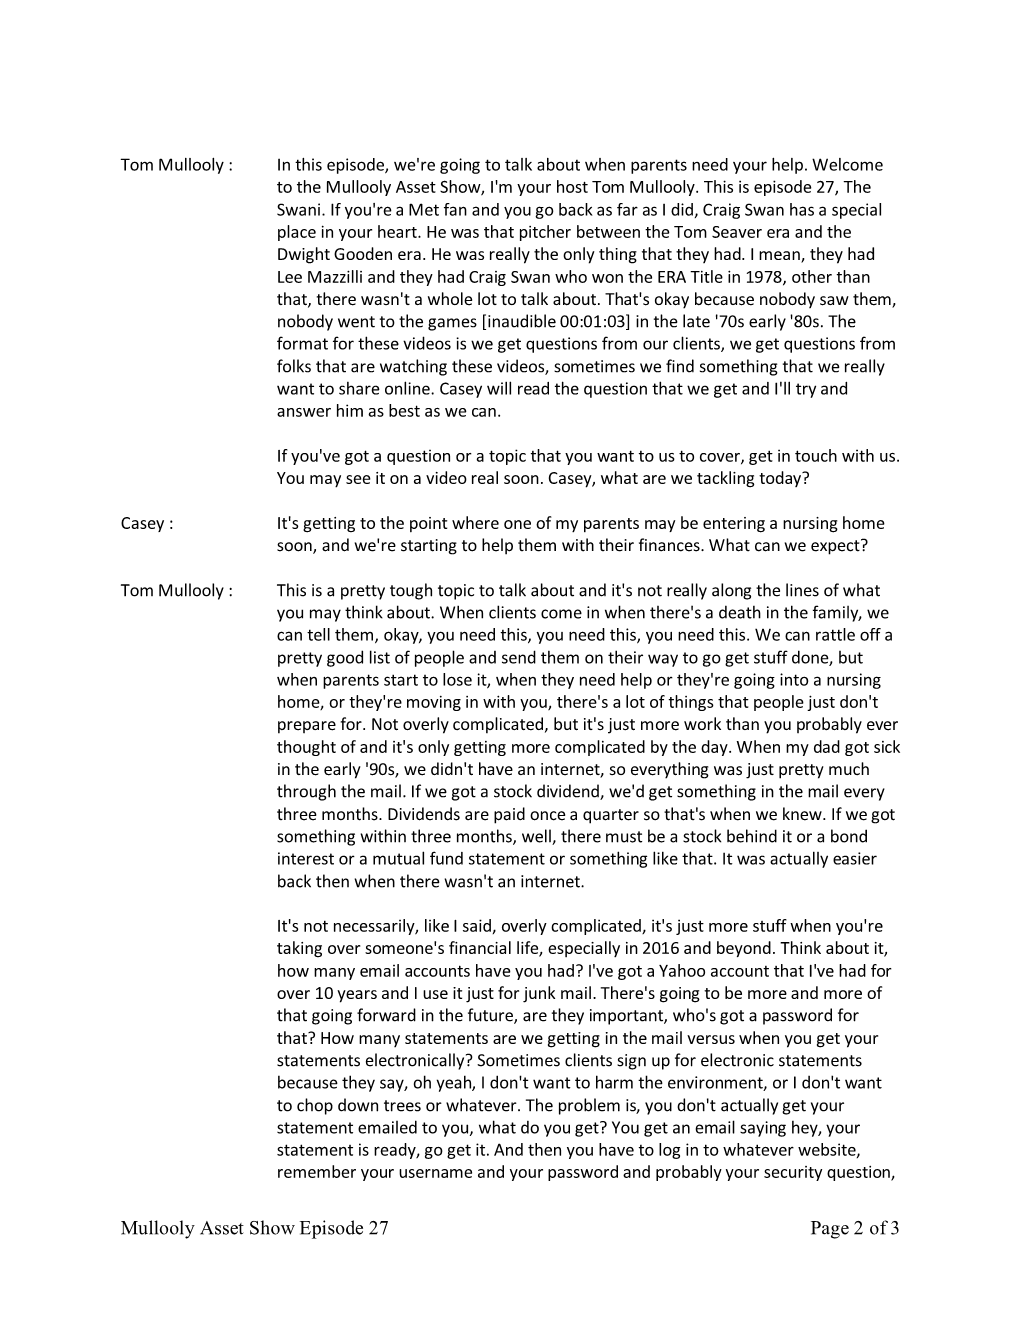 Mullooly Asset Show Episode 27 Page 2 of 3